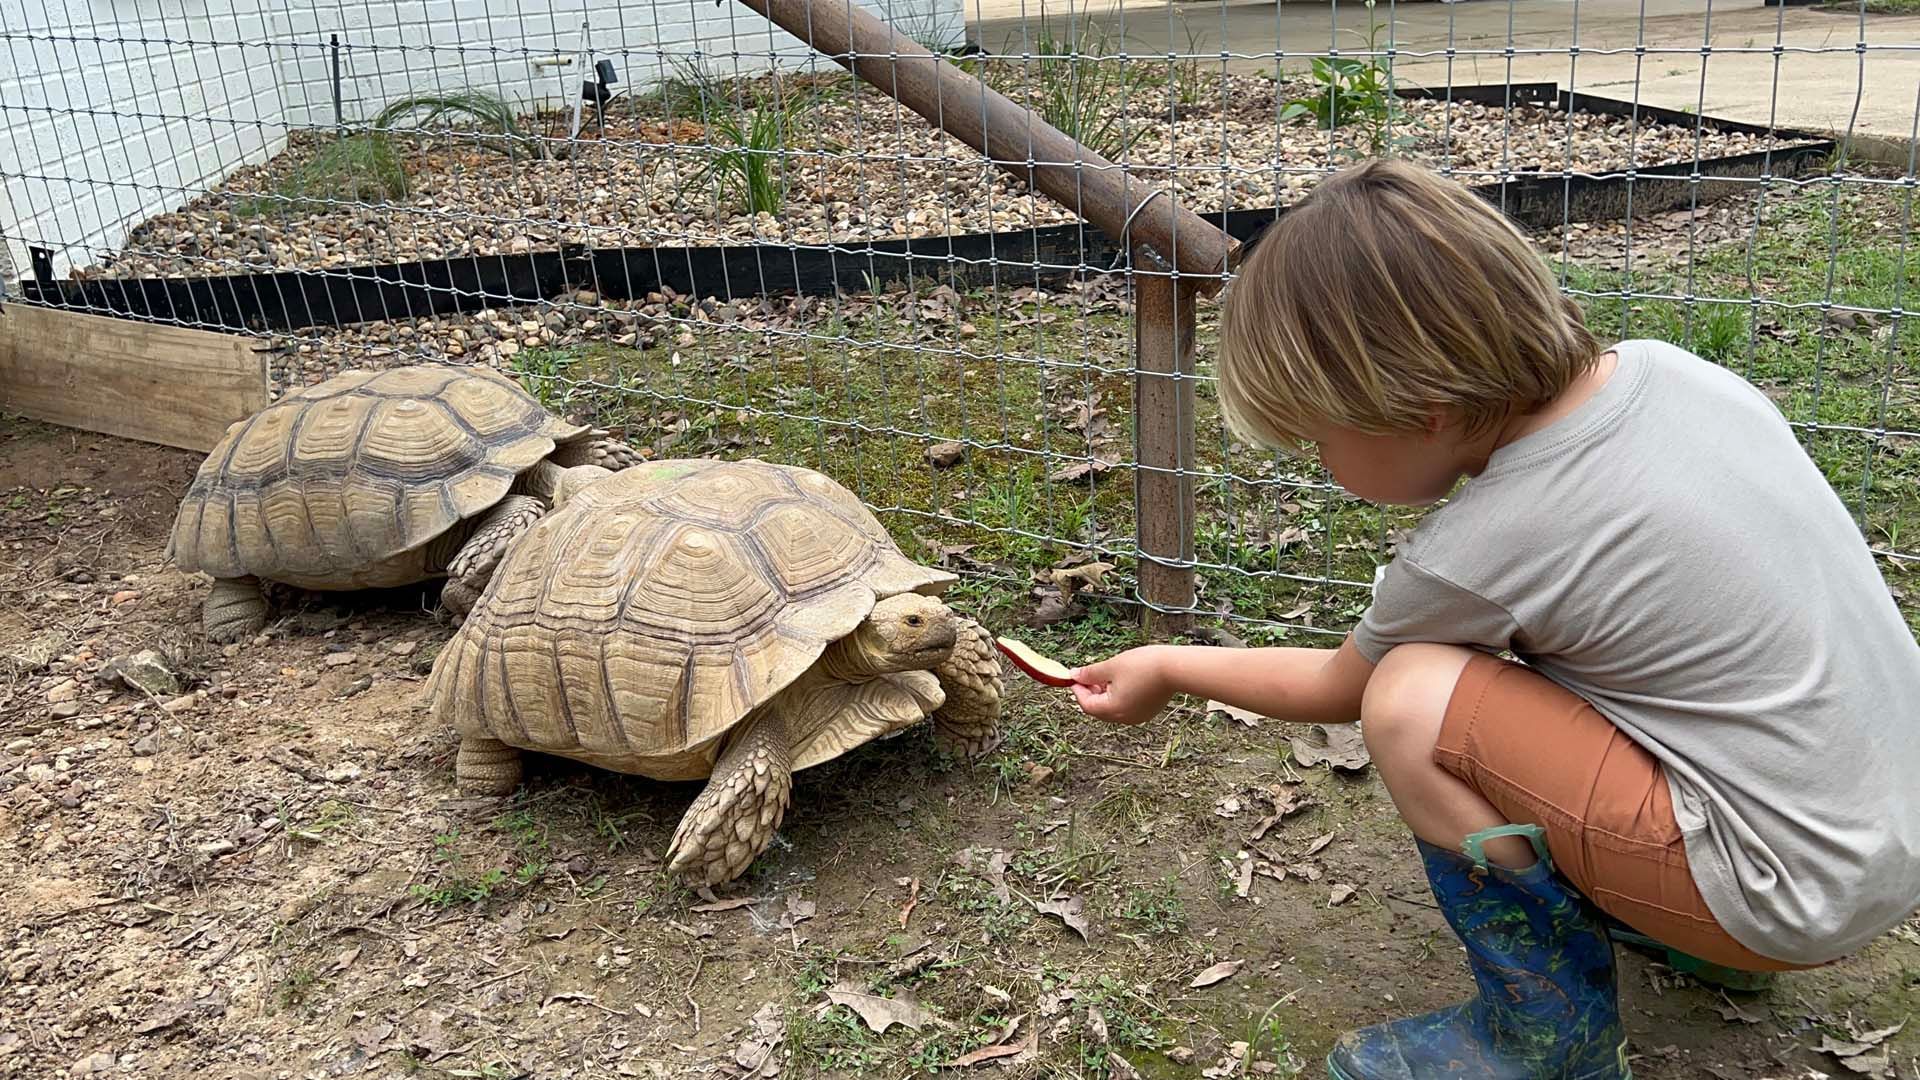 A little girl is feeding two turtles with a stick.